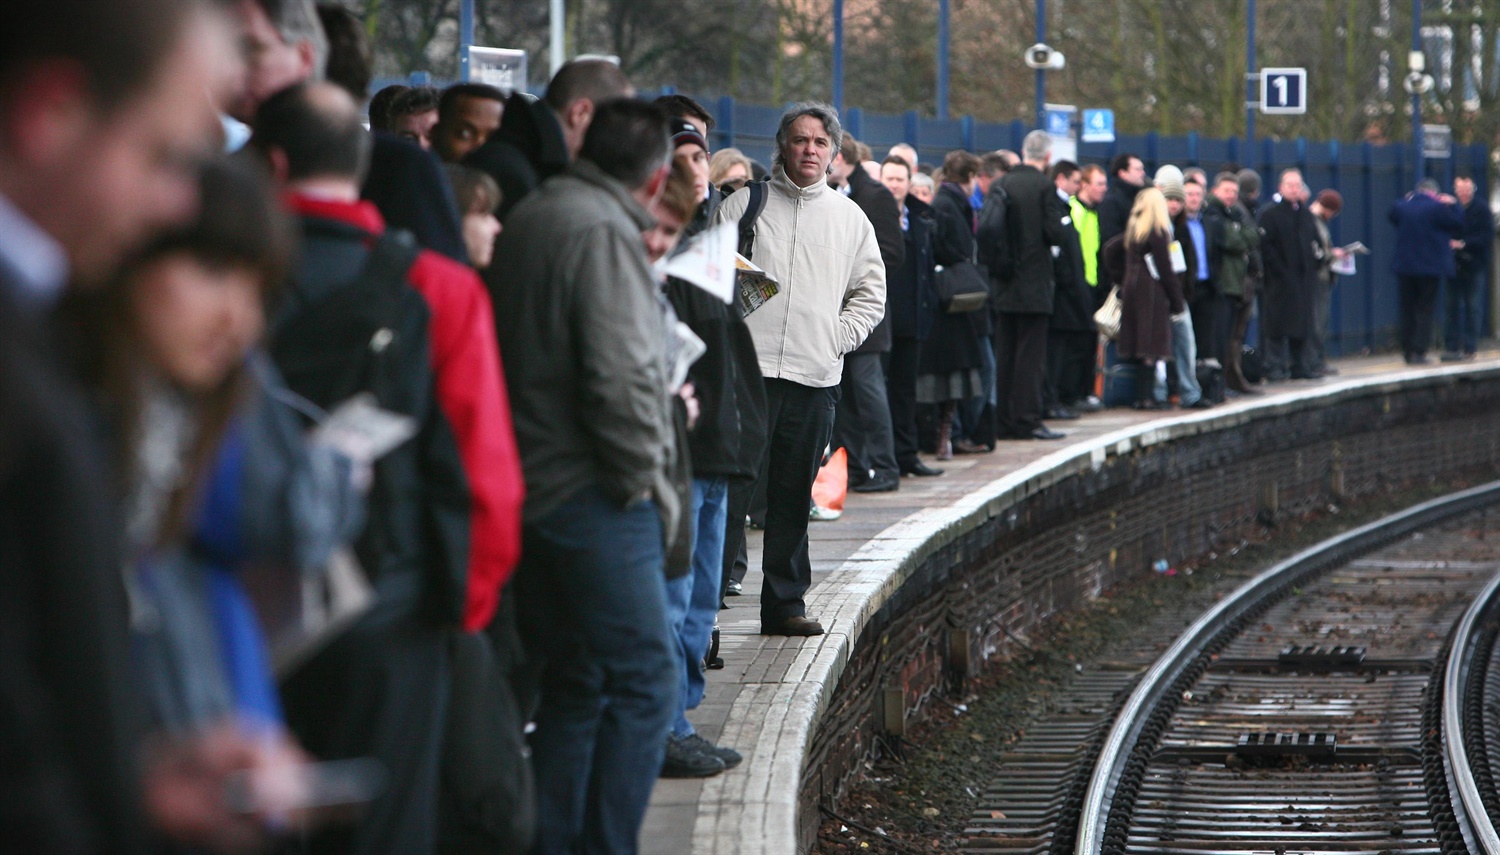 Less than one in 10 London and south east passengers told about disruption